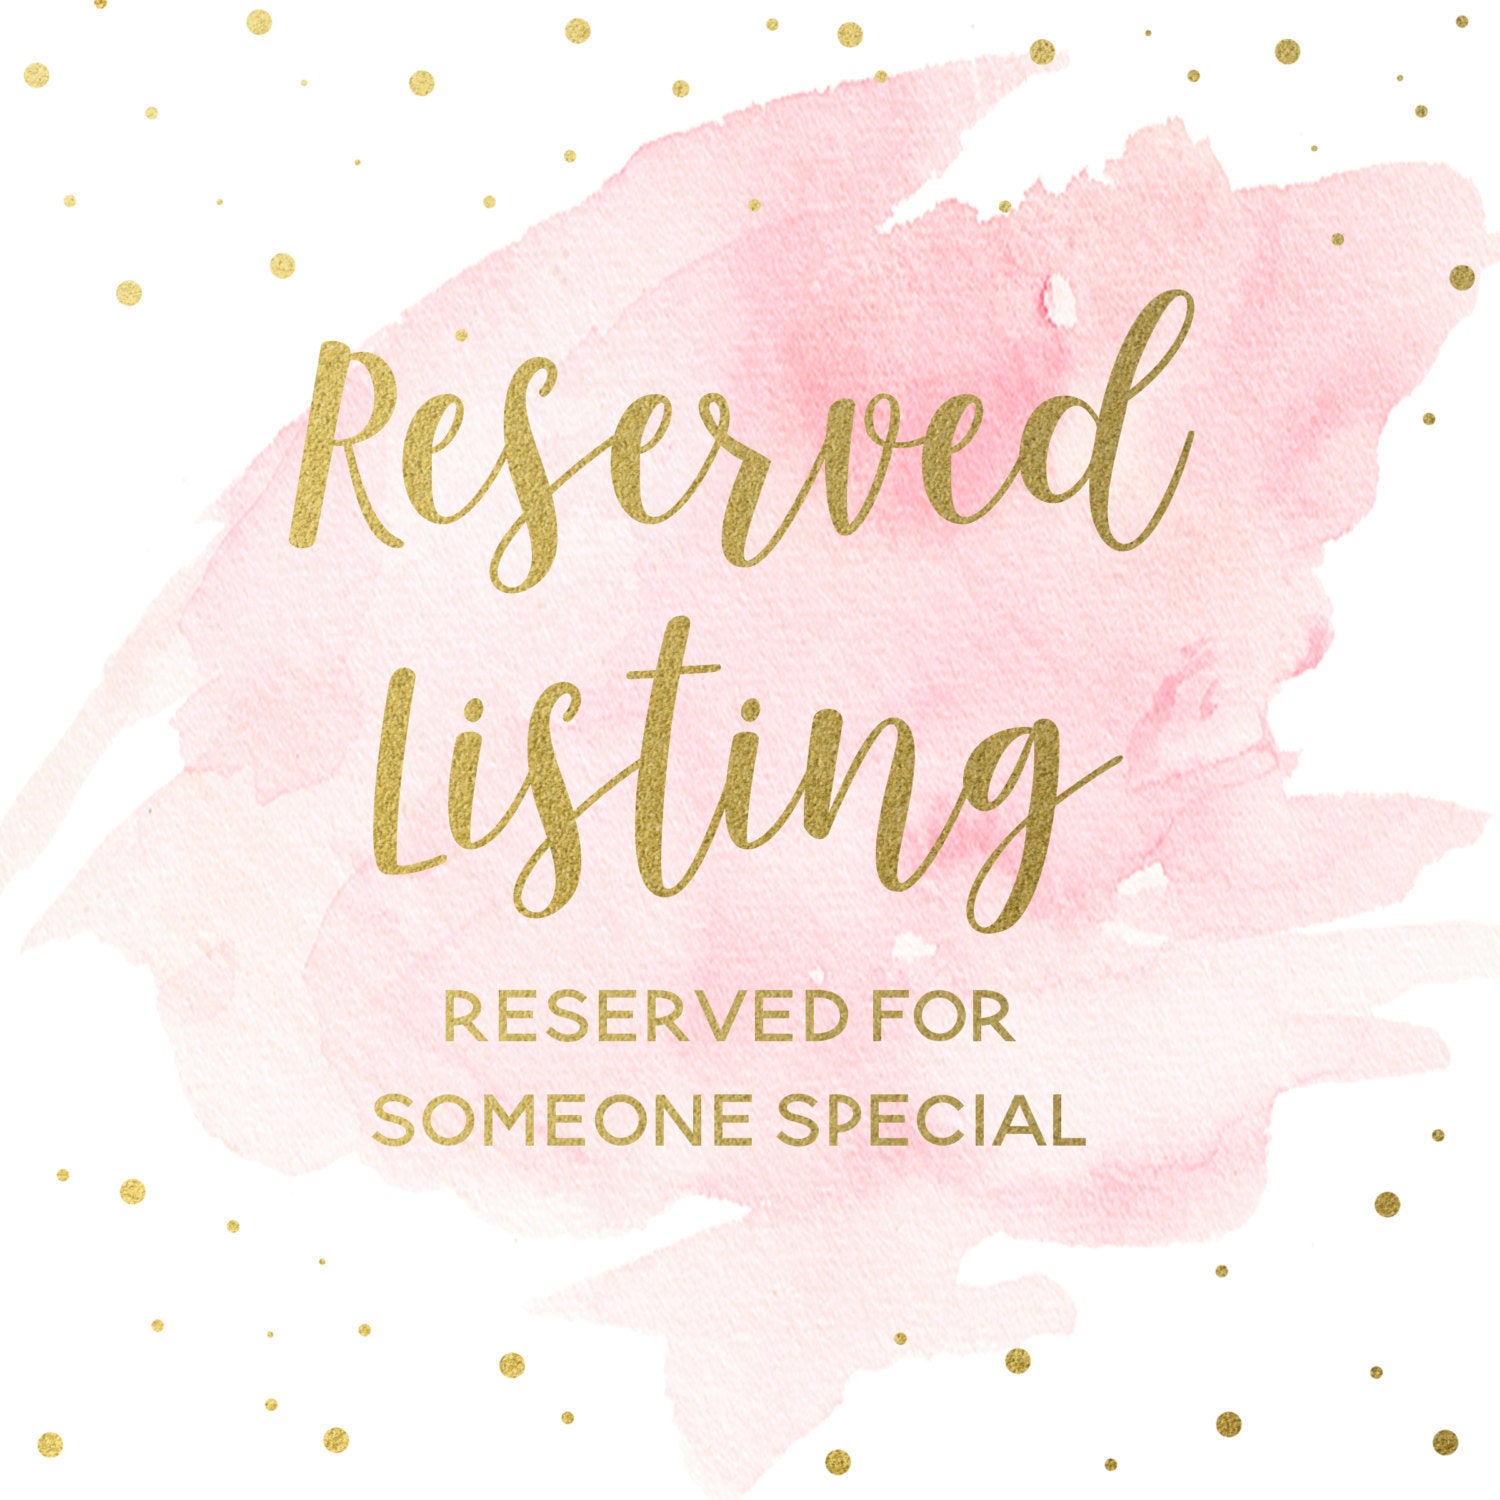 Reserved Listing - Candice C.